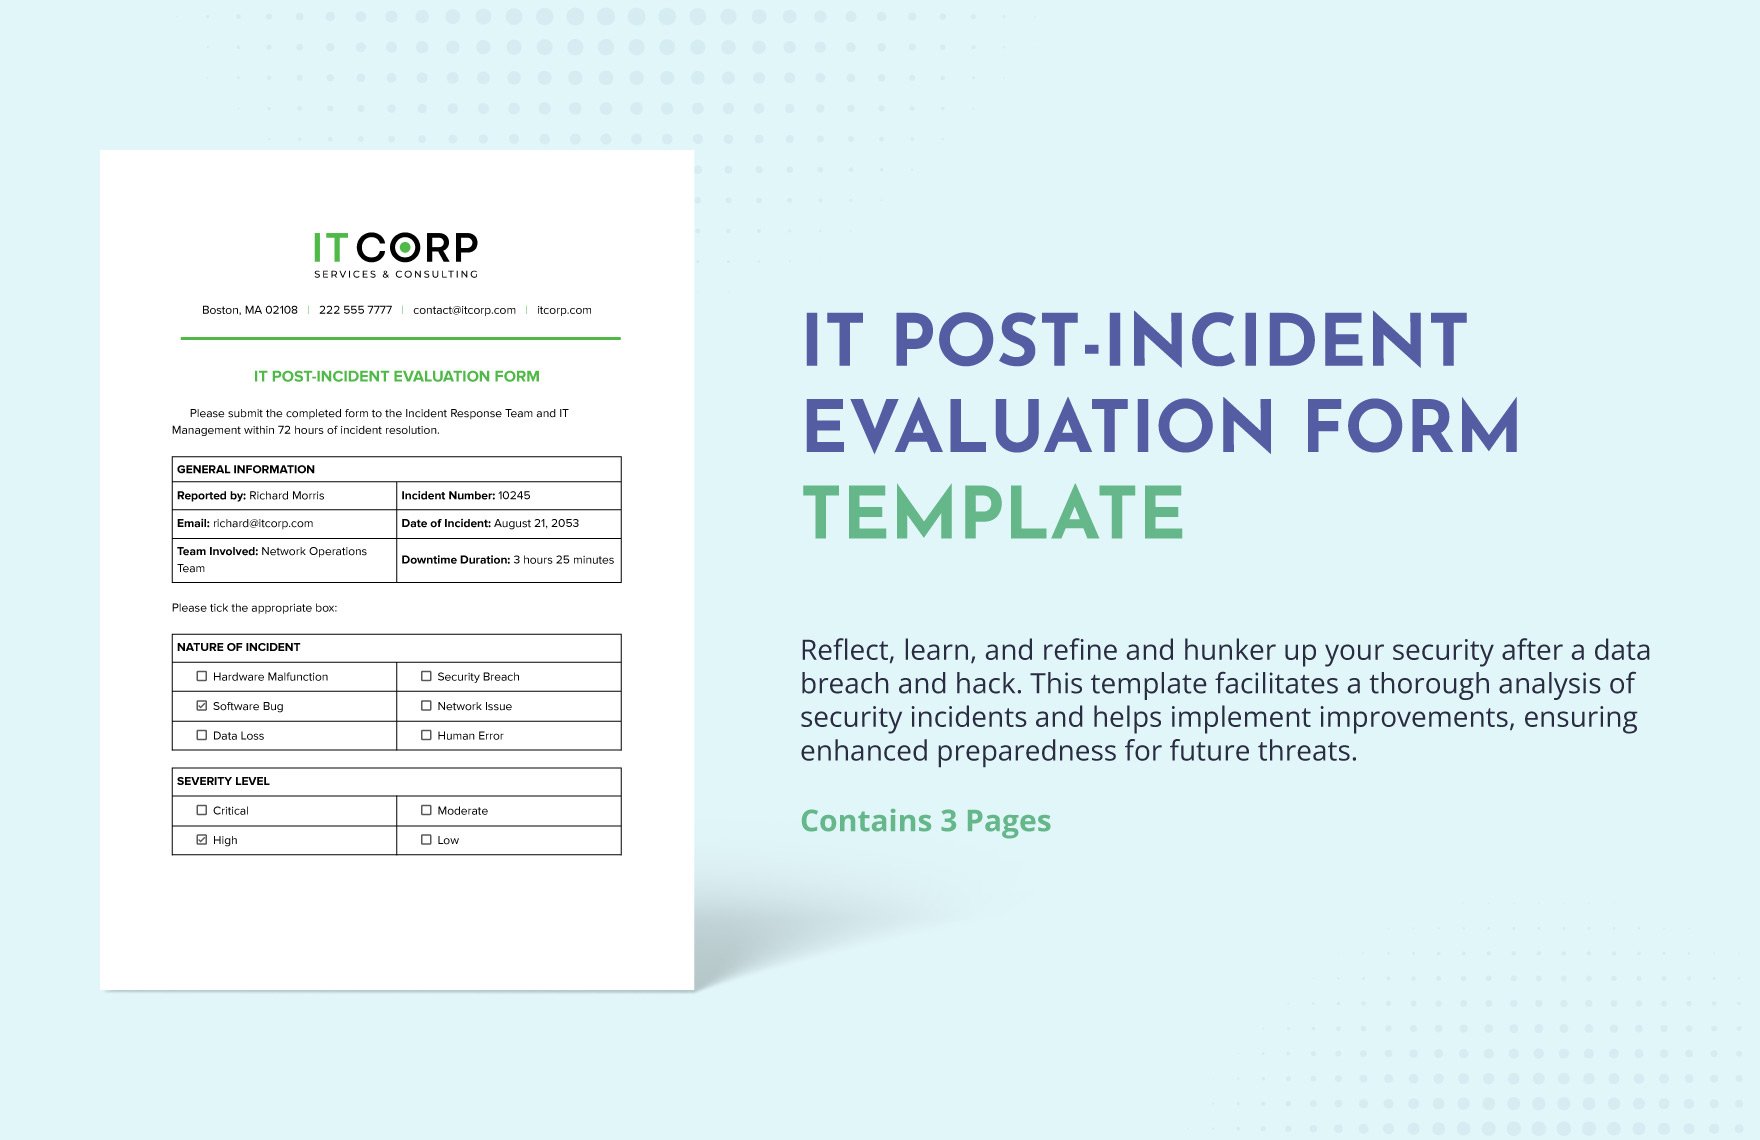 IT Post-Incident Evaluation Form Template